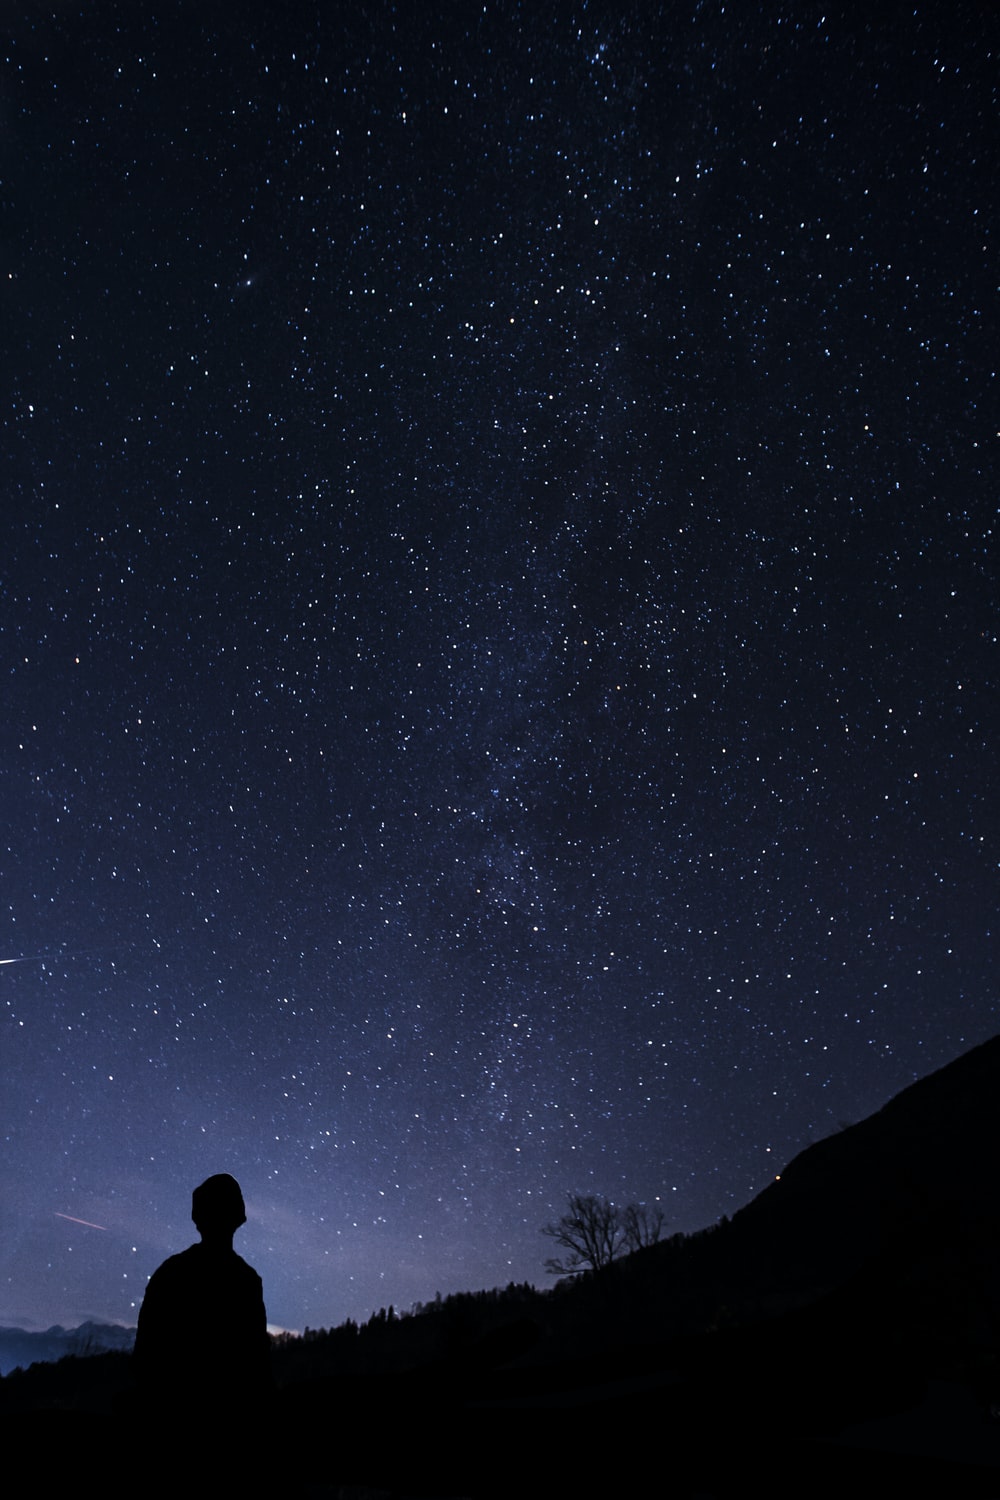 Night Sky Picture. Download Free Image